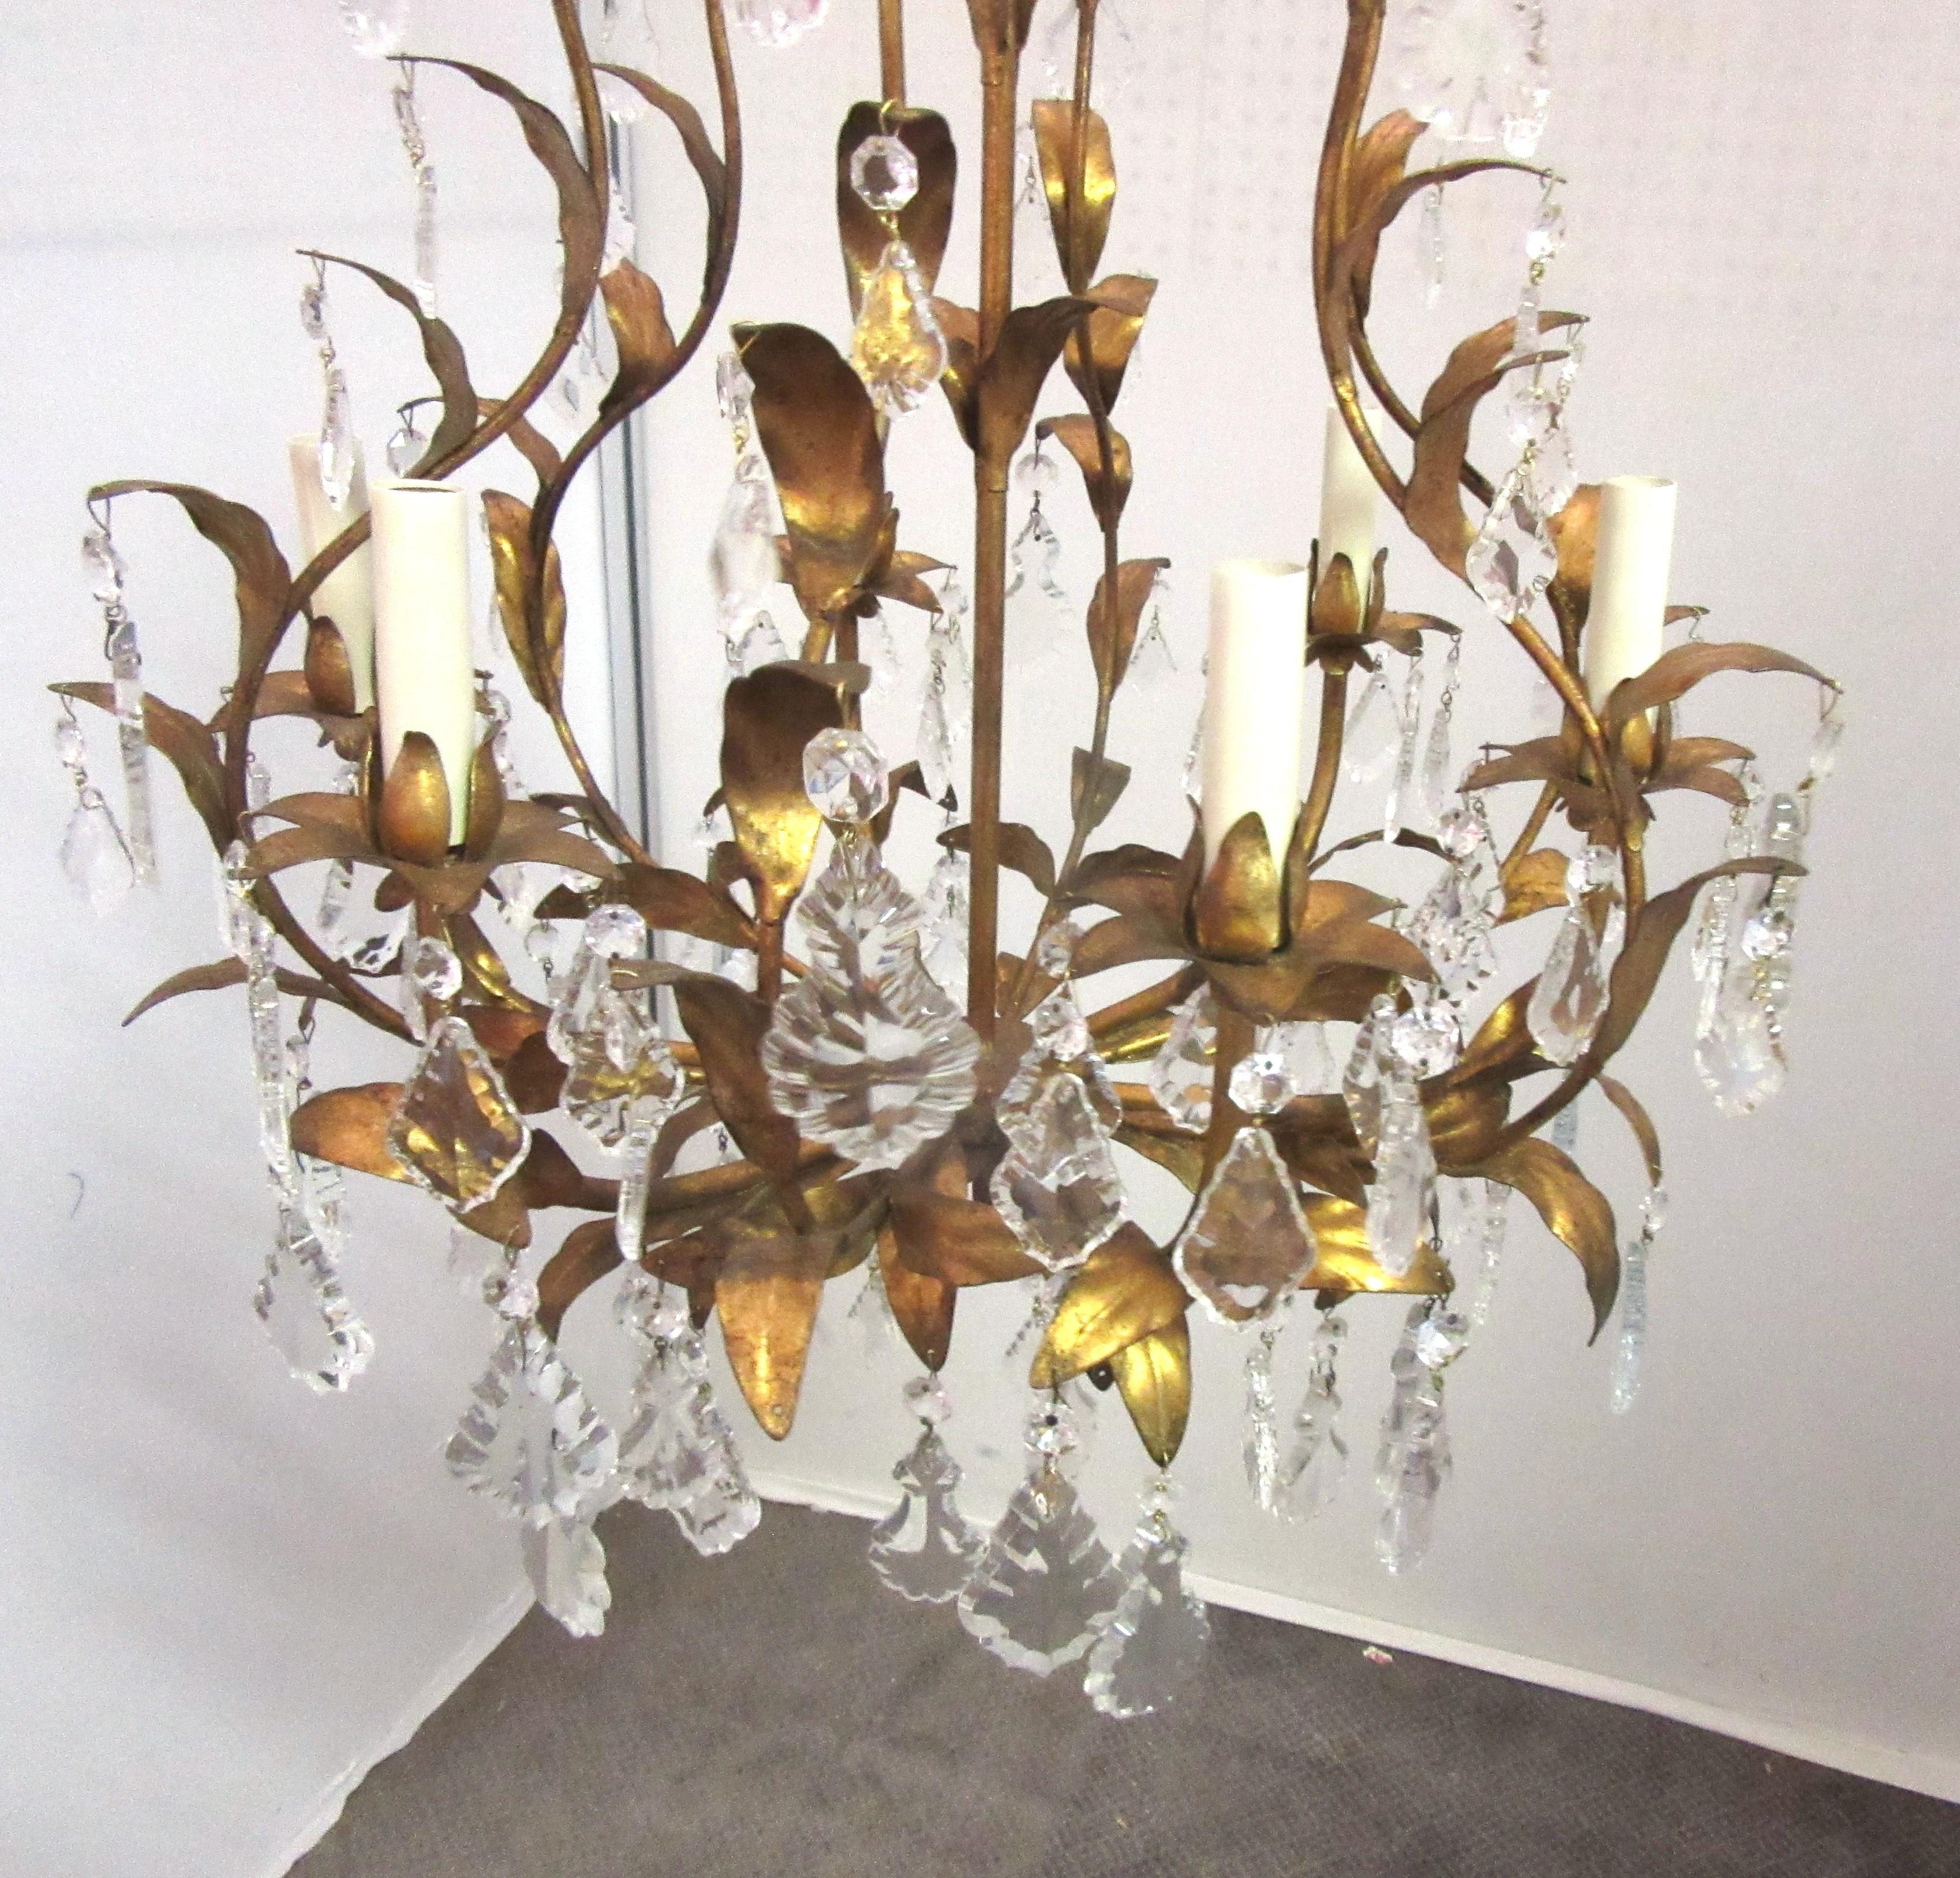 Italian Hollywood Regency Florentine bird cage chandelier made in Italy during the 1950s. The piece comes with graduated crystals and six lights. Restored with new light sleeves and antique crystals. Dimensions: 21